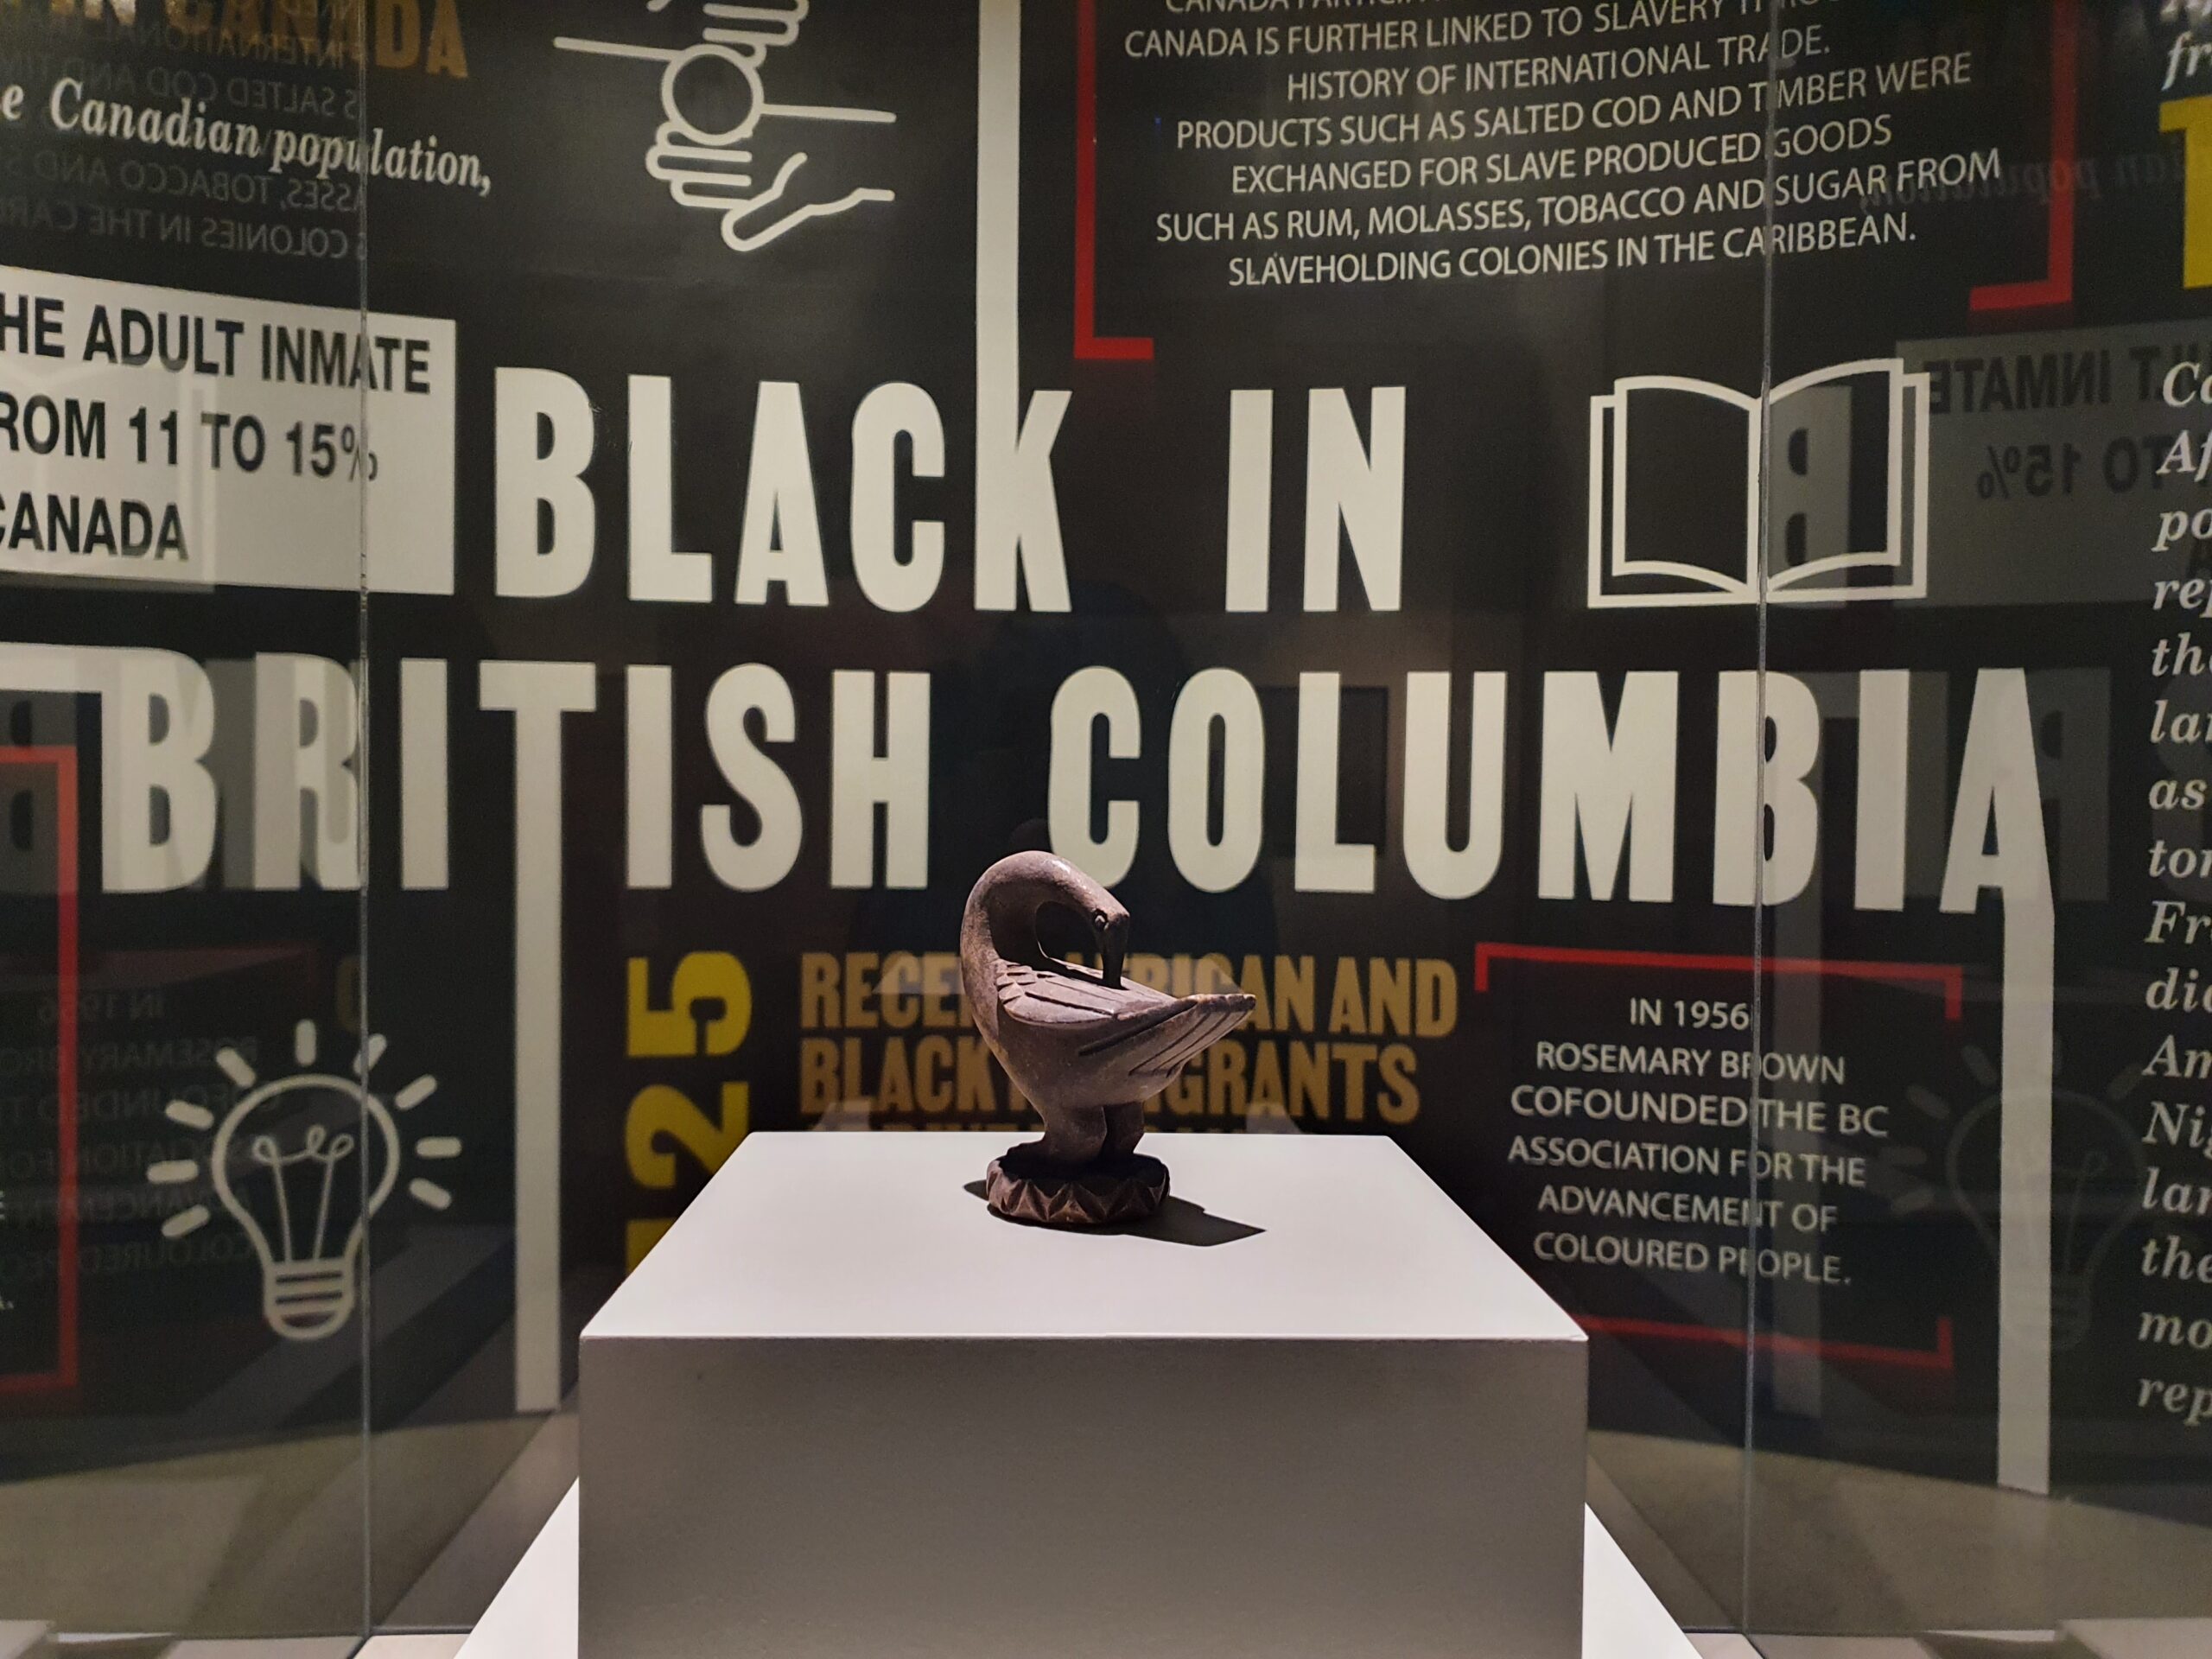 A sankofa bird figurine on a podium encased in glass. In the background is a black infographic wall with text in white, red, and yellow. The largest headline, framed around the figurine, is “Black in British Columbia”